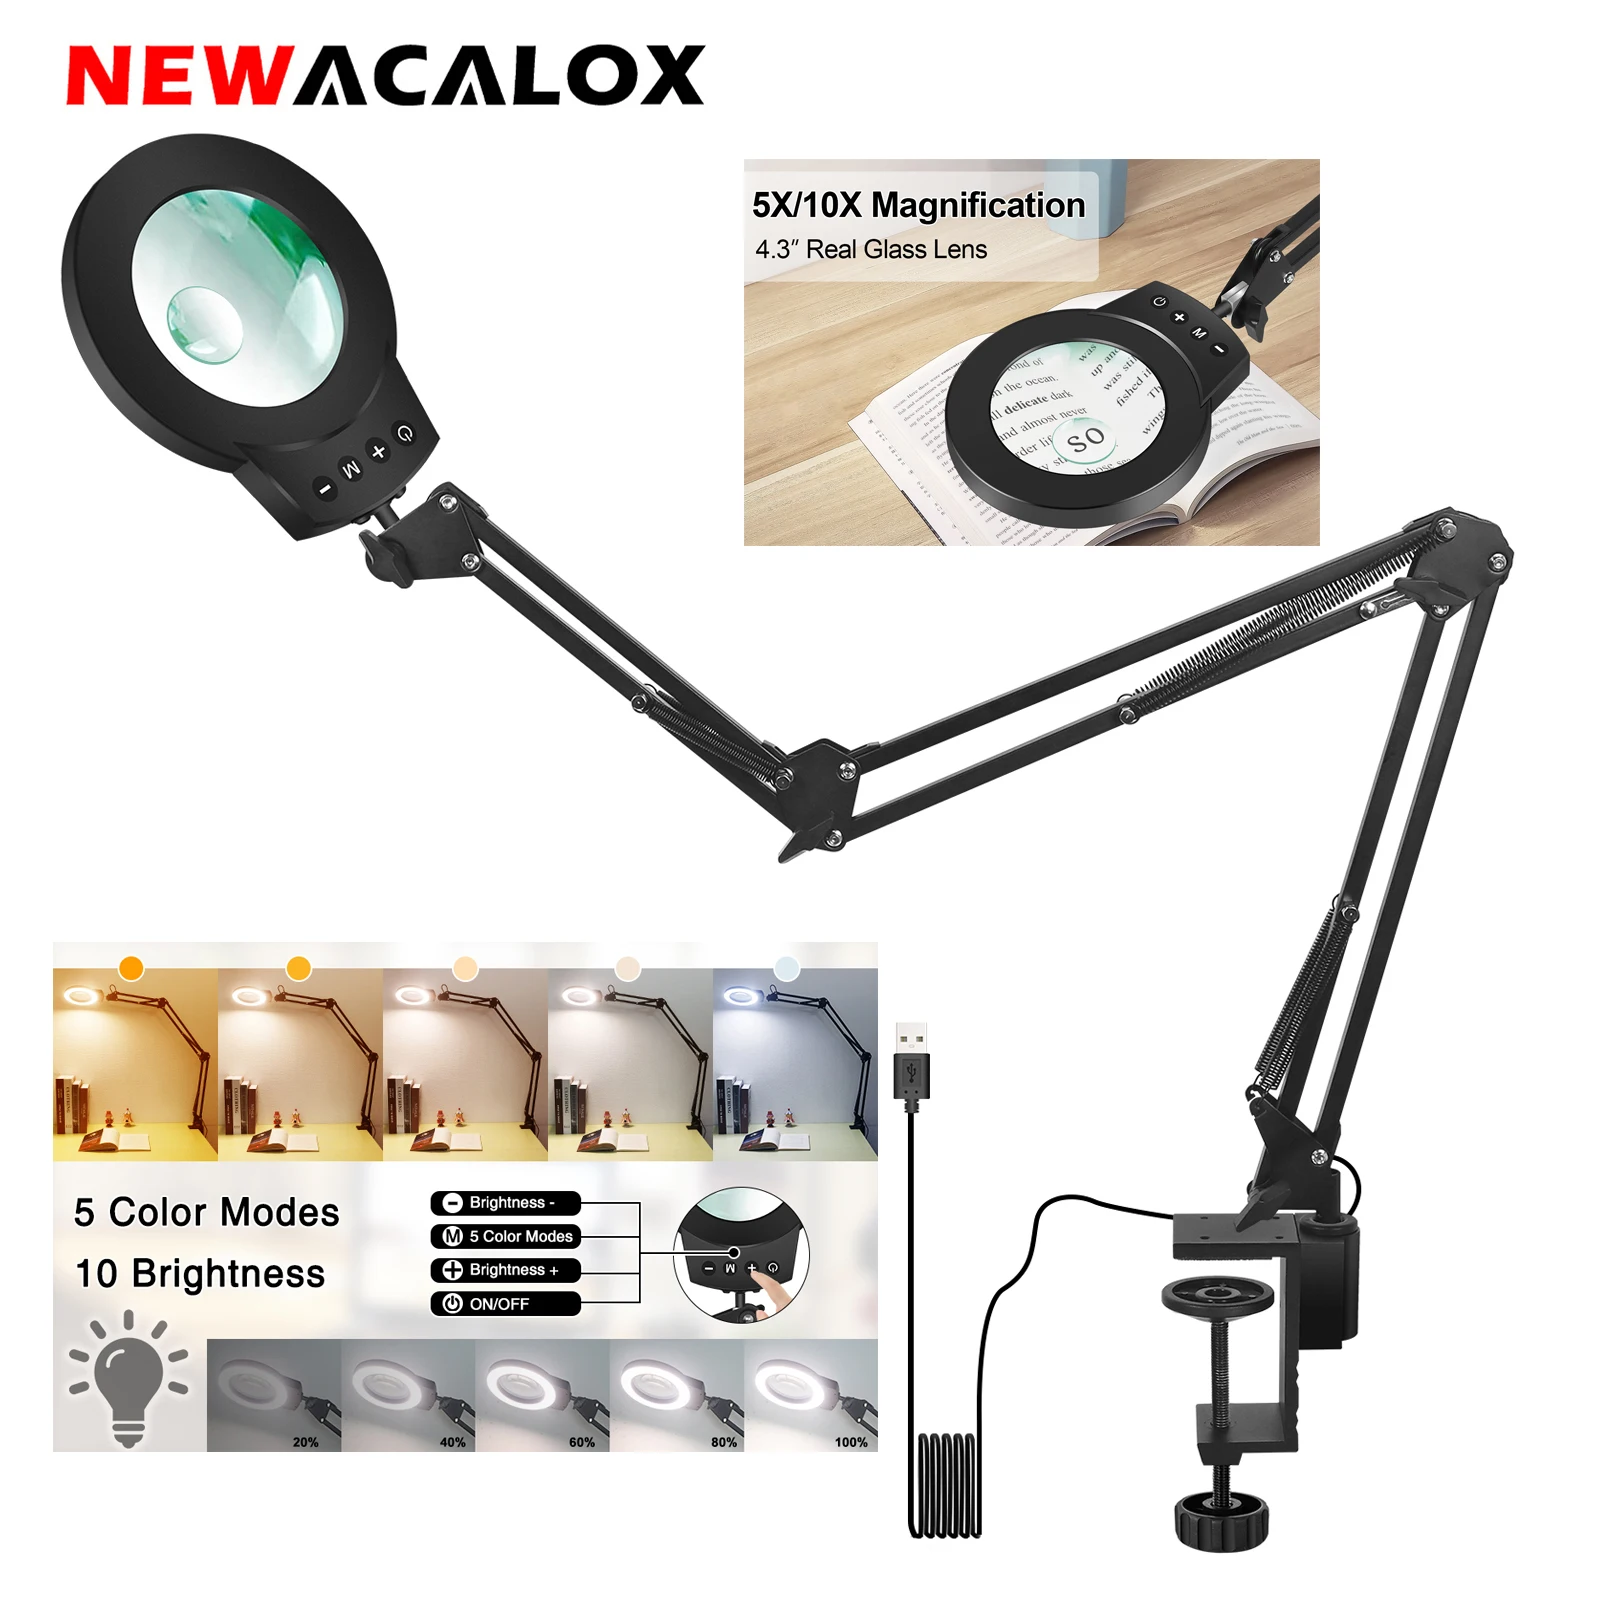 NEWACALOX 10X/5X Magnifier 5 Colors Illuminated Magnifying Glass Touch Control Table Lamp for Soldering Close Work RepairingTool